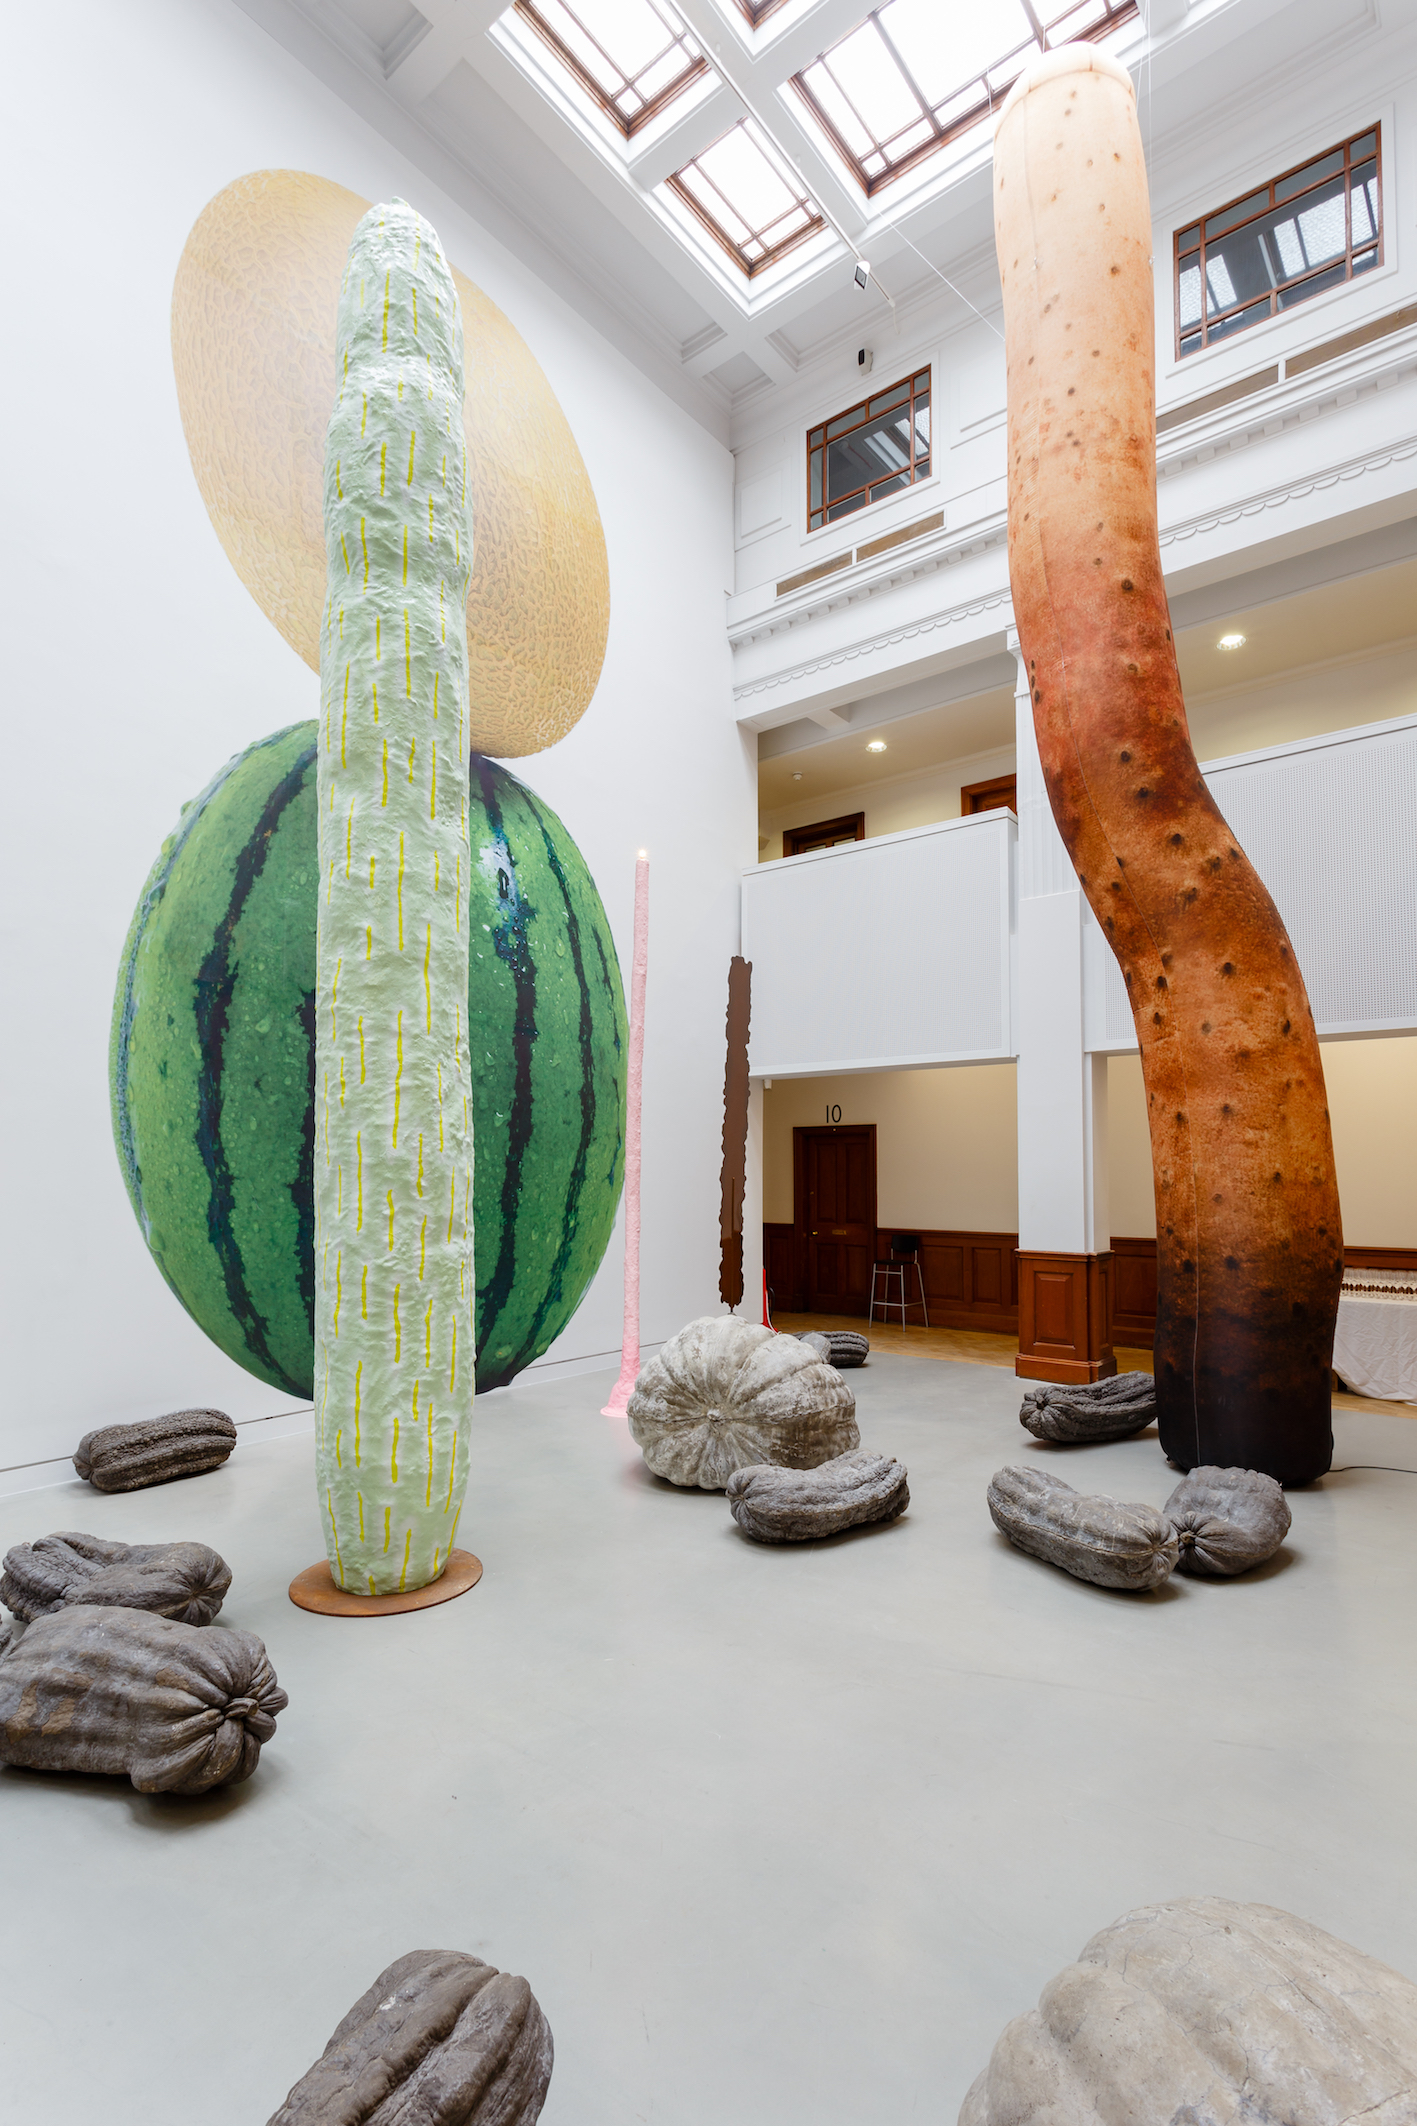 A series of sculptures arranged in the atrium of a gallery. Two huge cactus-like constructions rise vertically. On the floor are a selection of cast pumpkins and gourds in shades of grey.